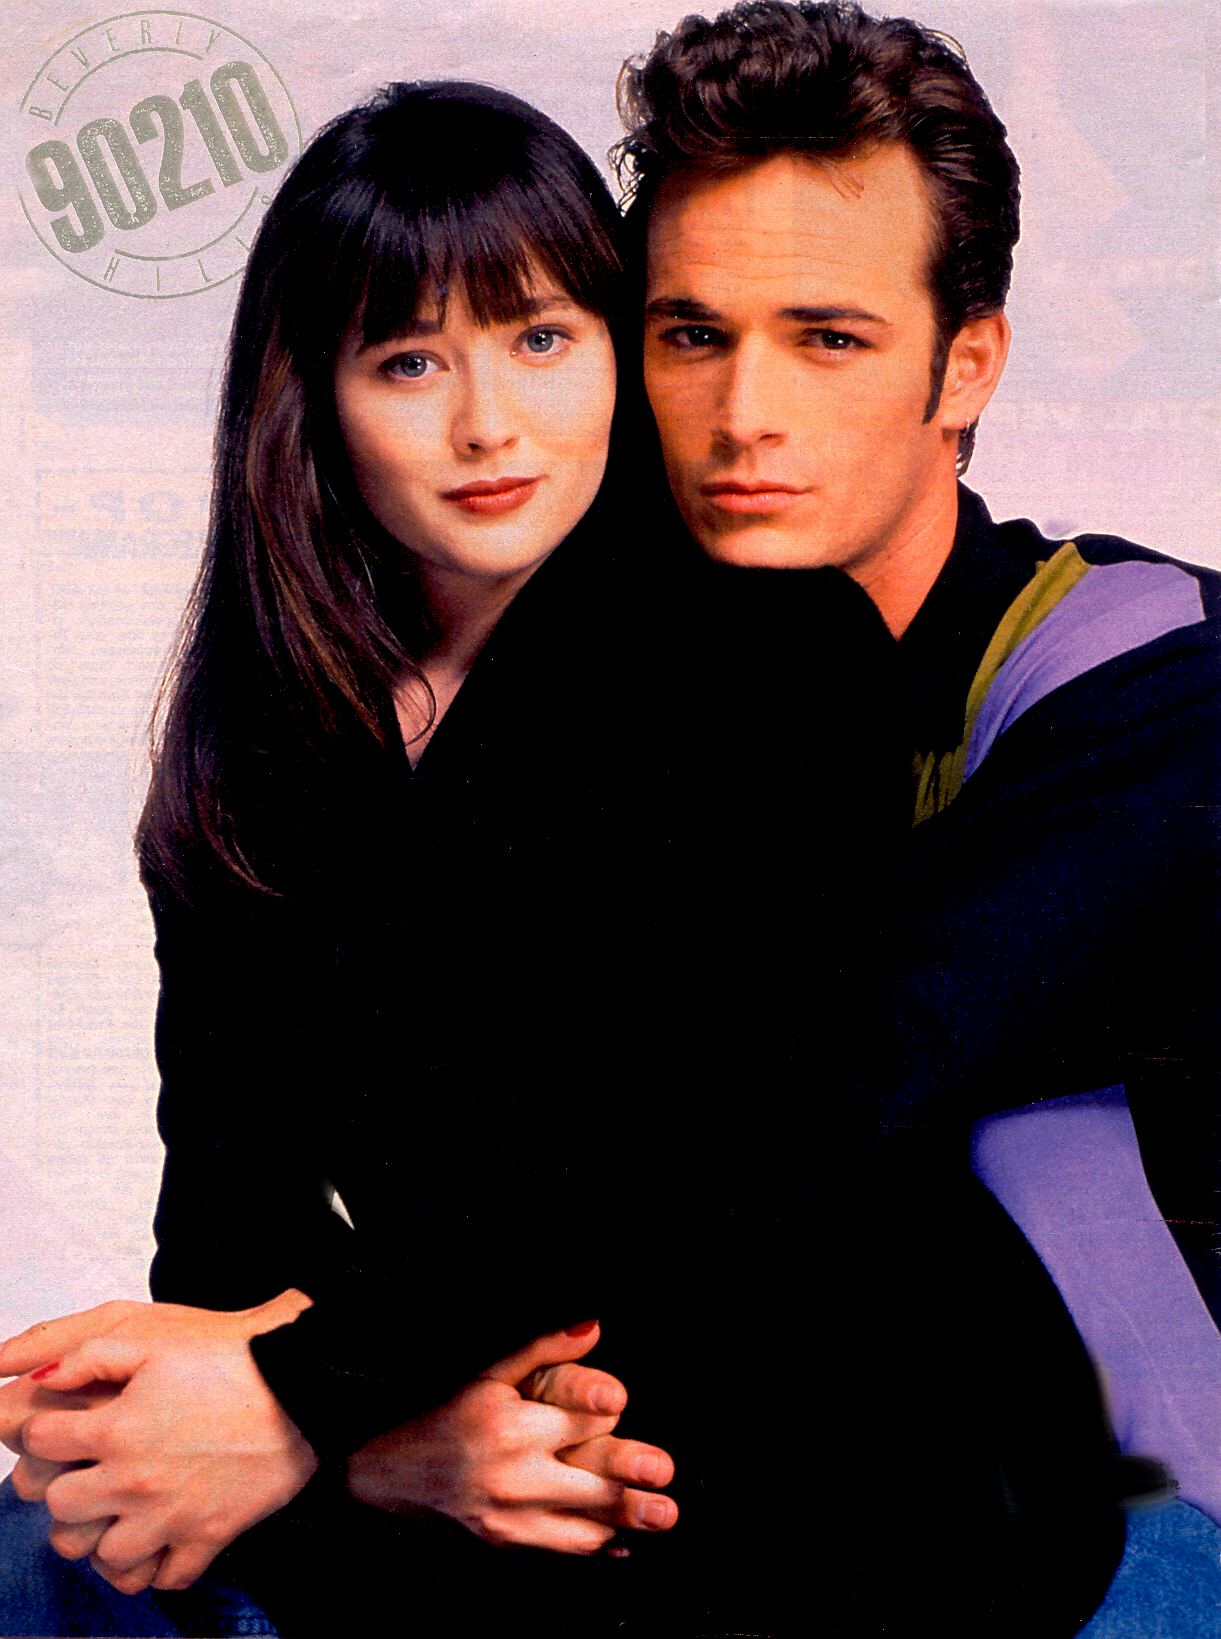 Dylan And Brenda Beverly Hills 90210 Photo 644259 Fanpop